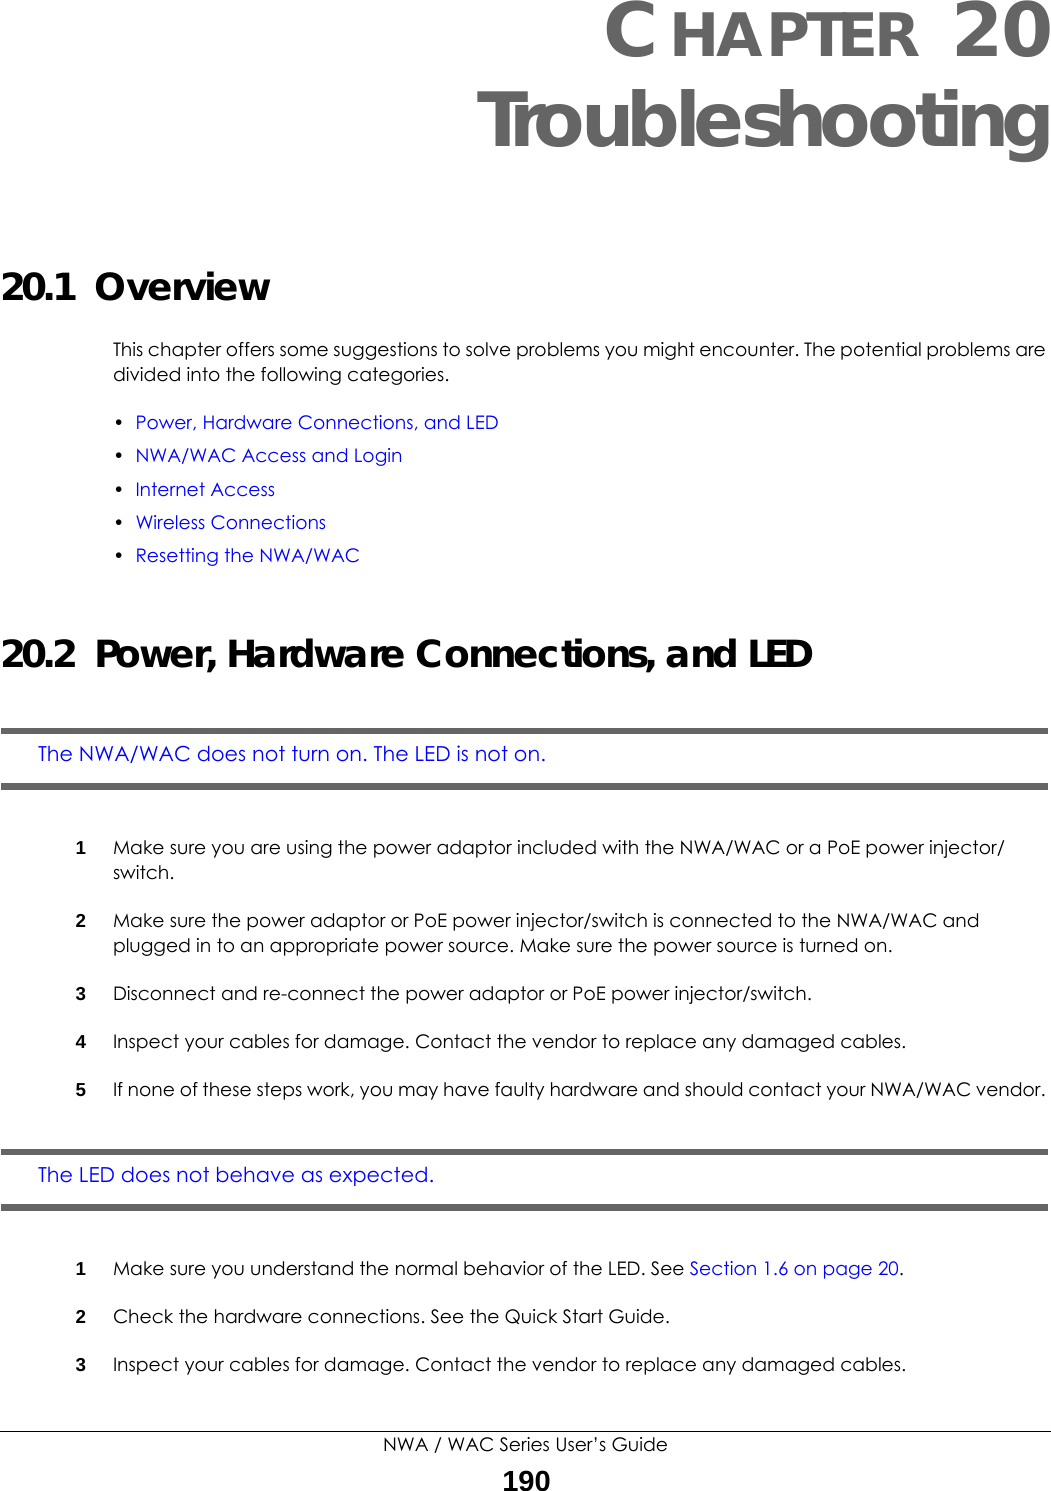 NWA / WAC Series User’s Guide190CHAPTER 20Troubleshooting20.1  OverviewThis chapter offers some suggestions to solve problems you might encounter. The potential problems are divided into the following categories.•Power, Hardware Connections, and LED•NWA/WAC Access and Login•Internet Access•Wireless Connections•Resetting the NWA/WAC20.2  Power, Hardware Connections, and LEDThe NWA/WAC does not turn on. The LED is not on.1Make sure you are using the power adaptor included with the NWA/WAC or a PoE power injector/switch.2Make sure the power adaptor or PoE power injector/switch is connected to the NWA/WAC and plugged in to an appropriate power source. Make sure the power source is turned on.3Disconnect and re-connect the power adaptor or PoE power injector/switch.4Inspect your cables for damage. Contact the vendor to replace any damaged cables.5If none of these steps work, you may have faulty hardware and should contact your NWA/WAC vendor. The LED does not behave as expected.1Make sure you understand the normal behavior of the LED. See Section 1.6 on page 20.2Check the hardware connections. See the Quick Start Guide.3Inspect your cables for damage. Contact the vendor to replace any damaged cables.